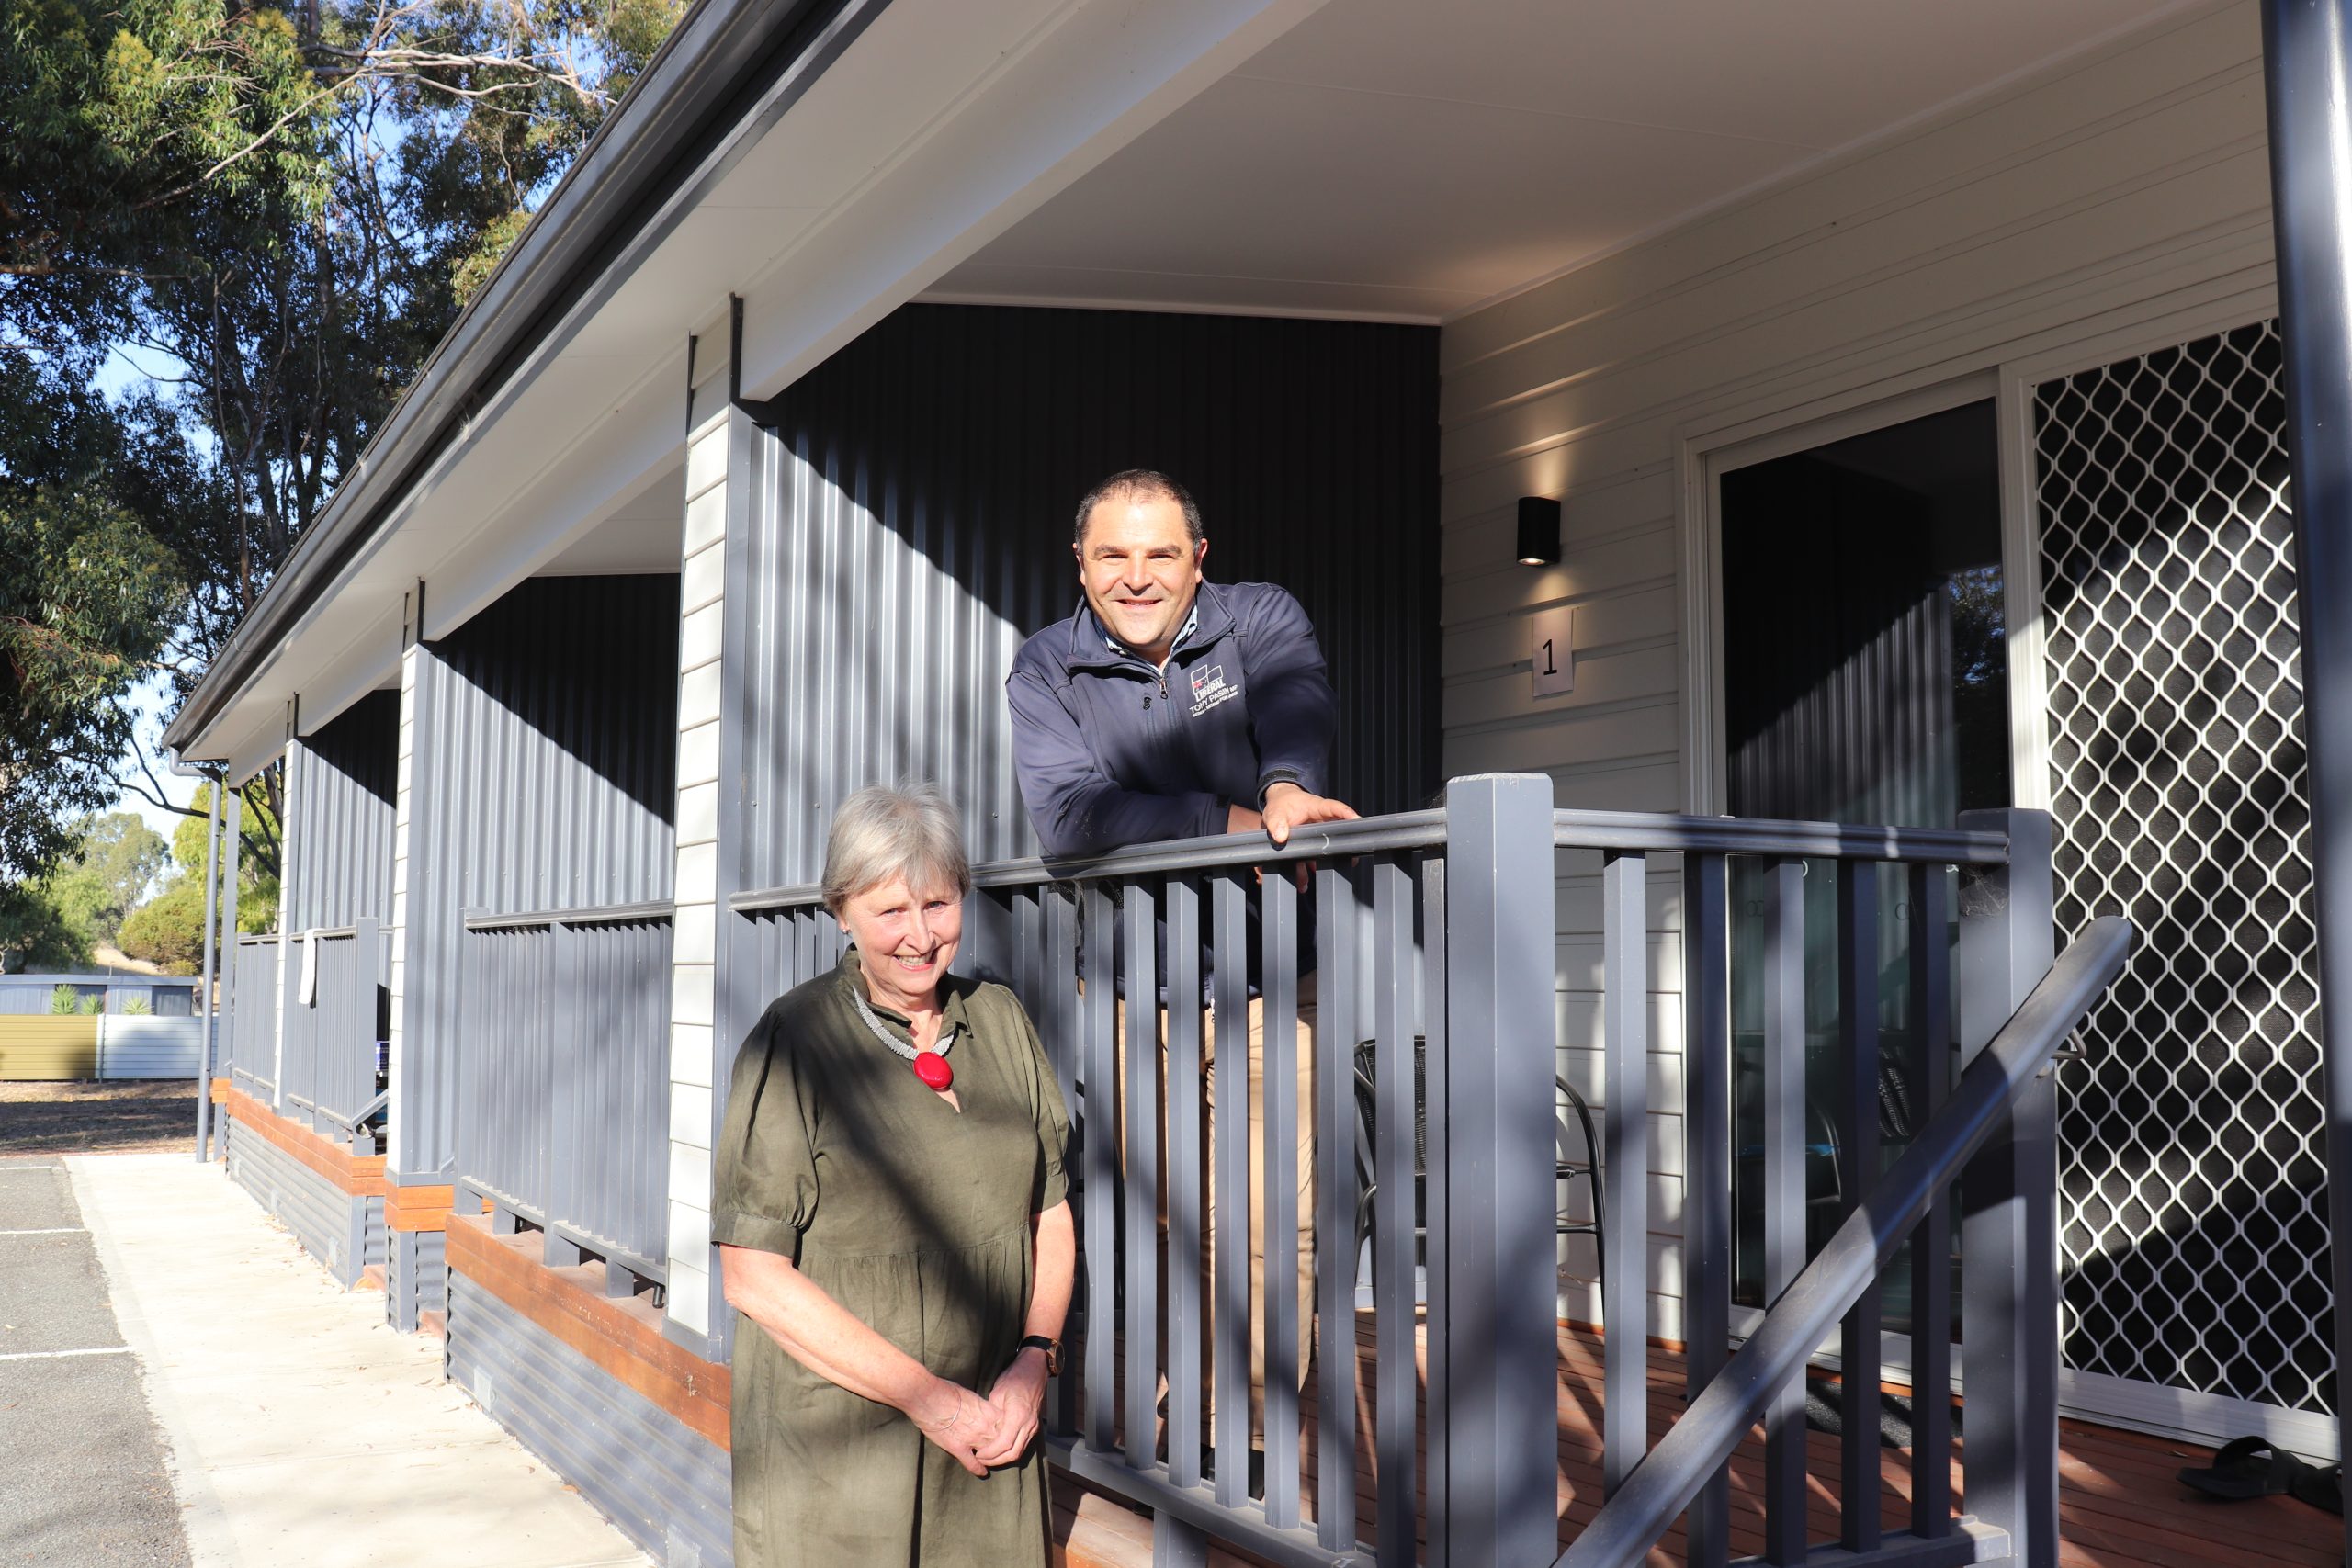 COALITION LEGACY DELIVERS FOR BORDERTOWN